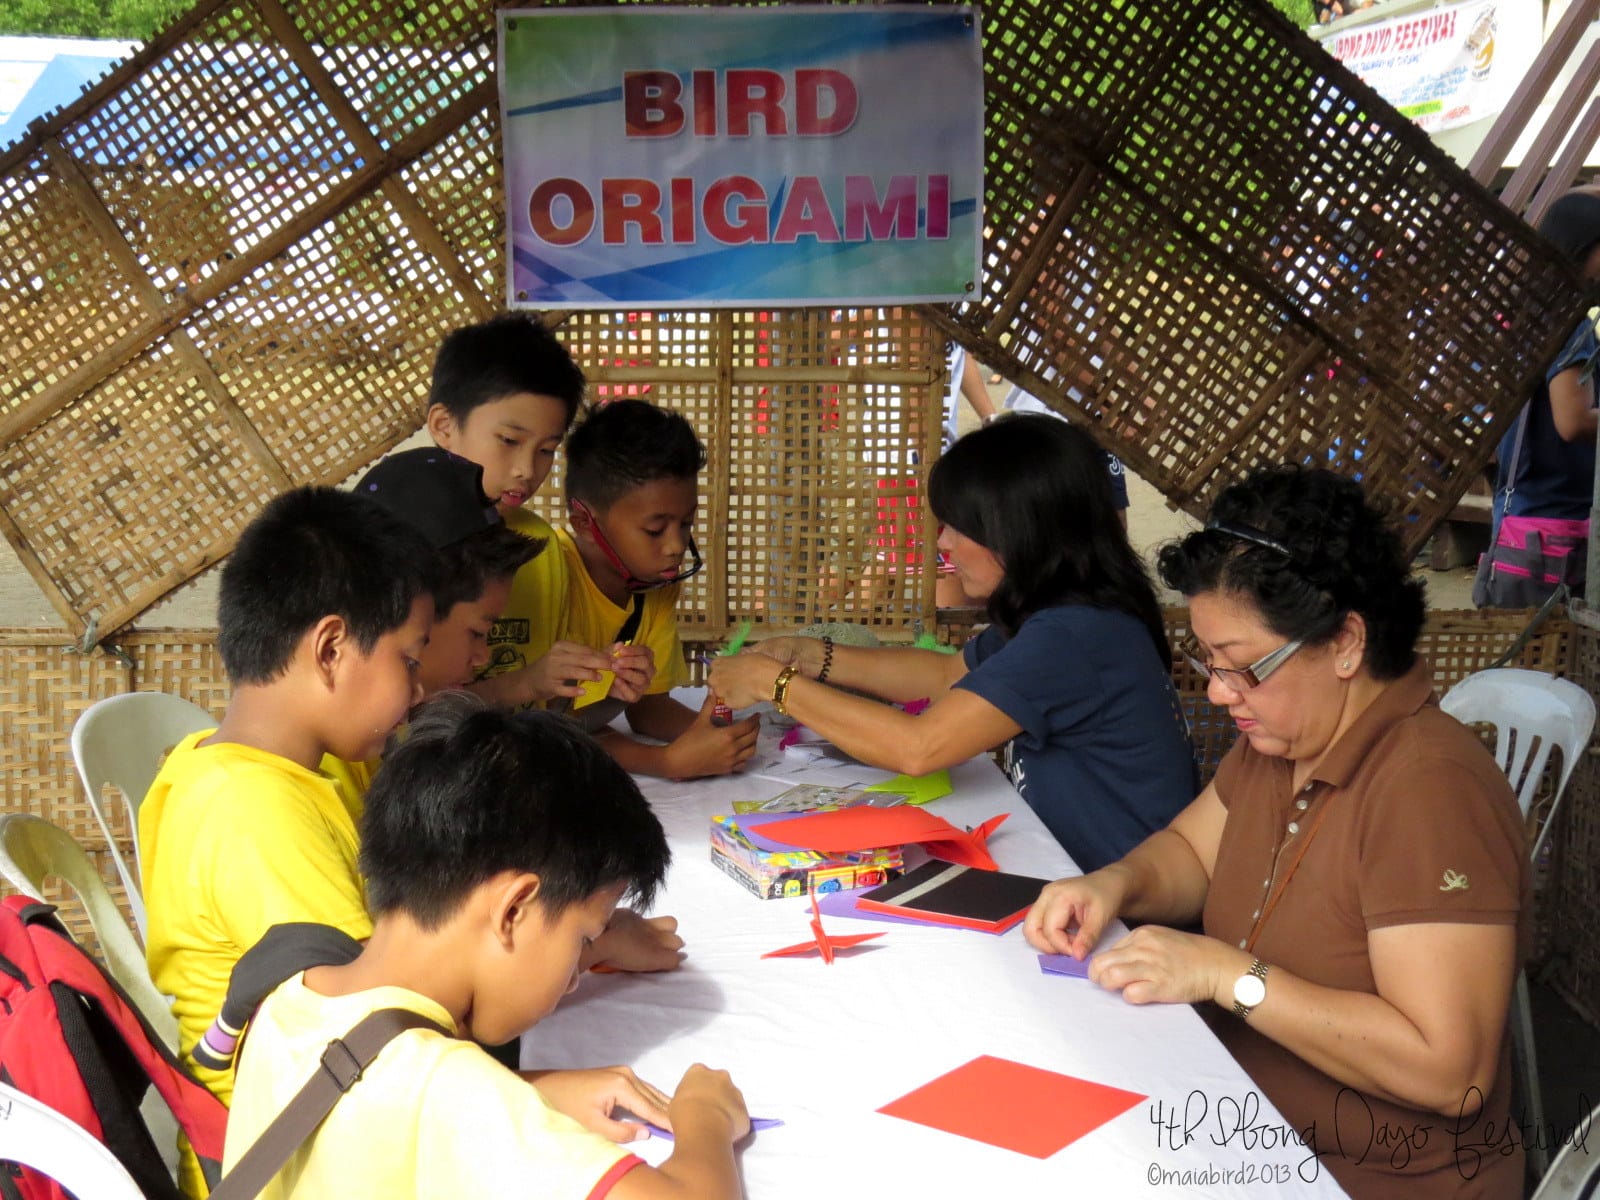 WBCP member Baby Magadia (in brown) assists in the origami booth. Photo by Maia Tanedo